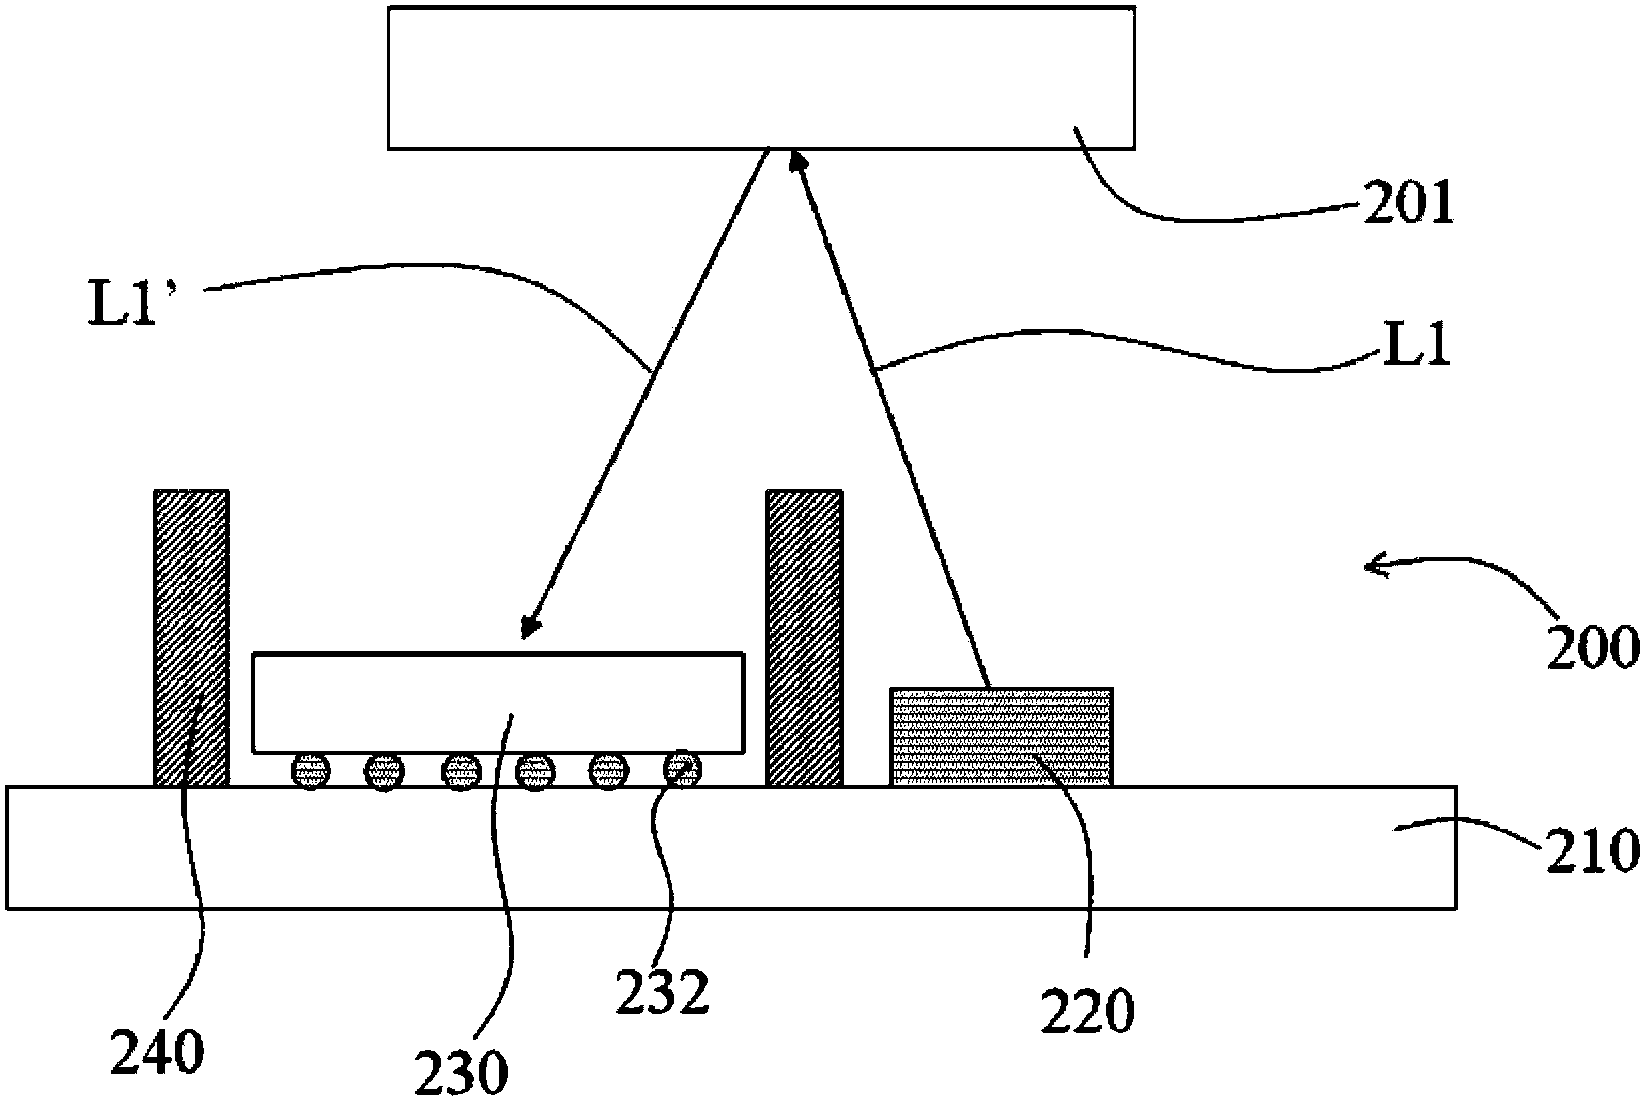 Packaging structure of optical device